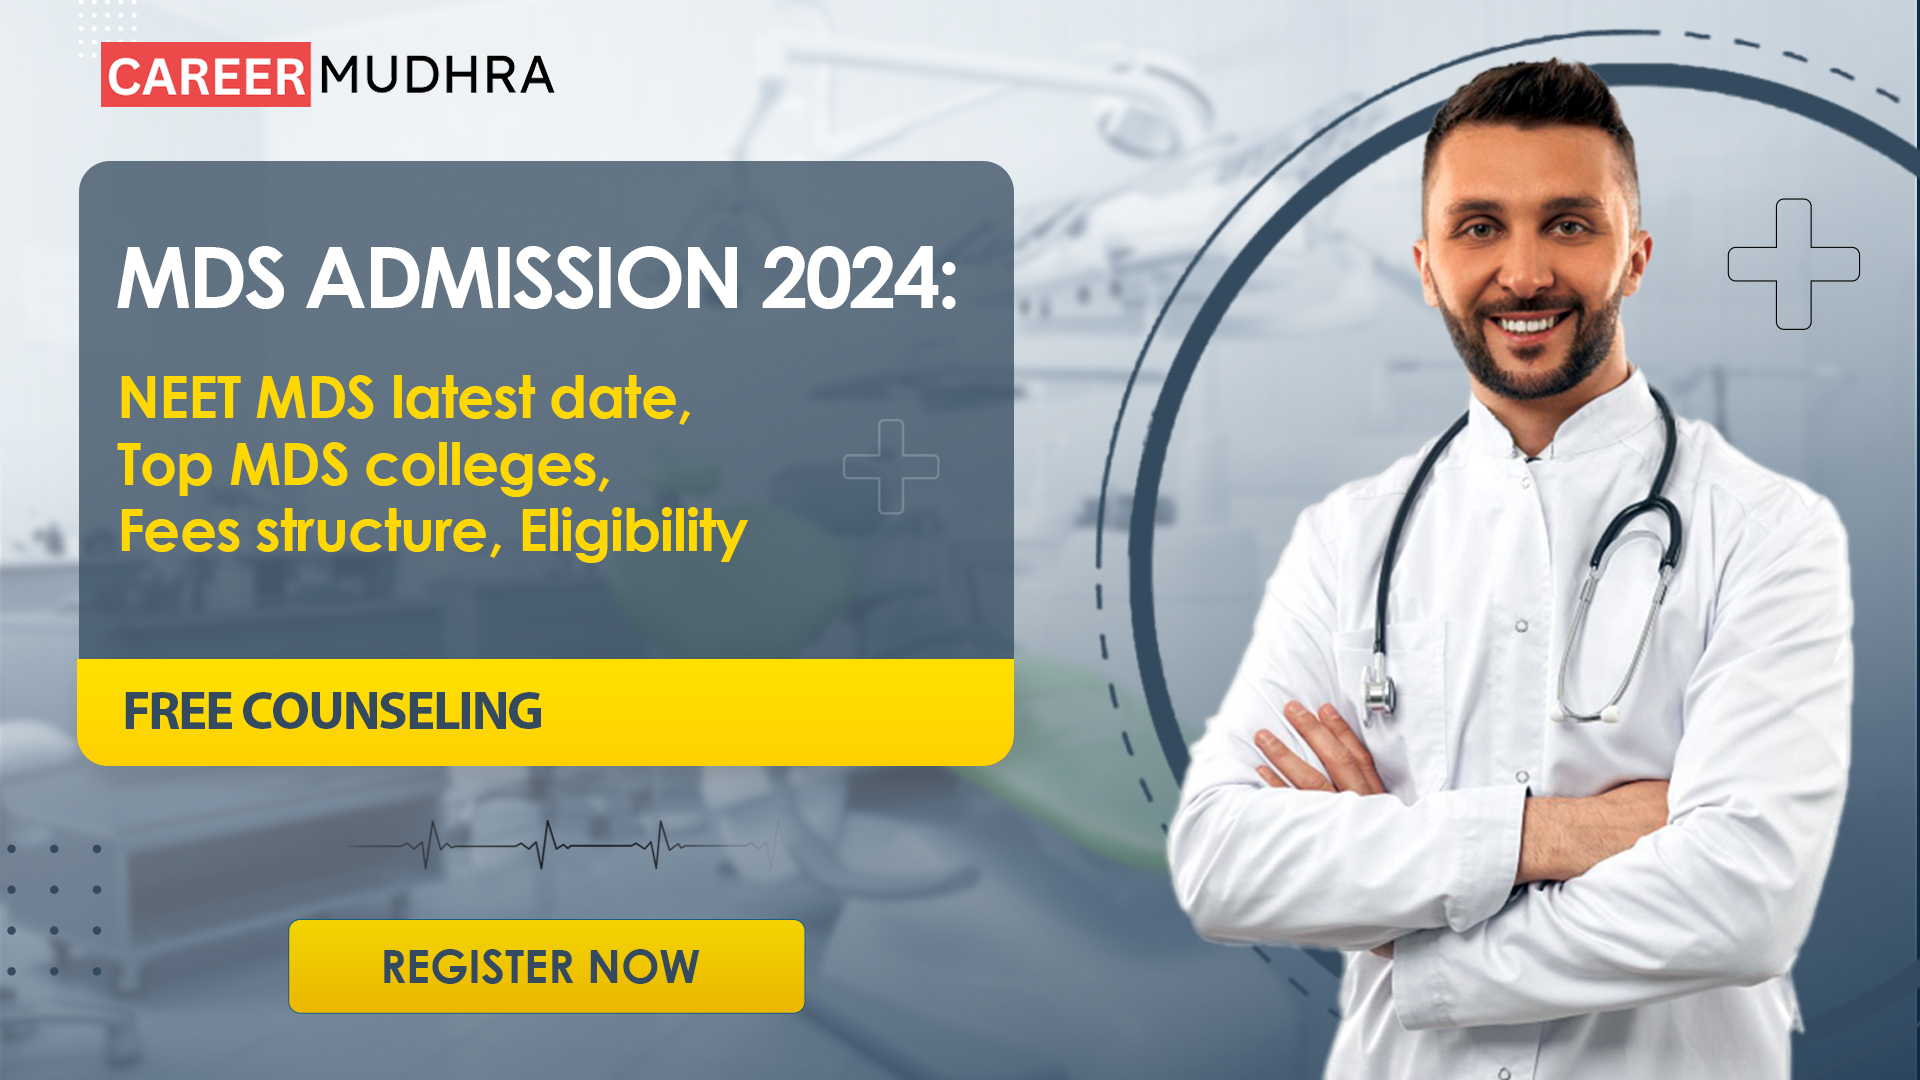 MDS Admission 2024: NEET MDS 2024 latest date, Top MDS colleges, Fees structure, Eligibility